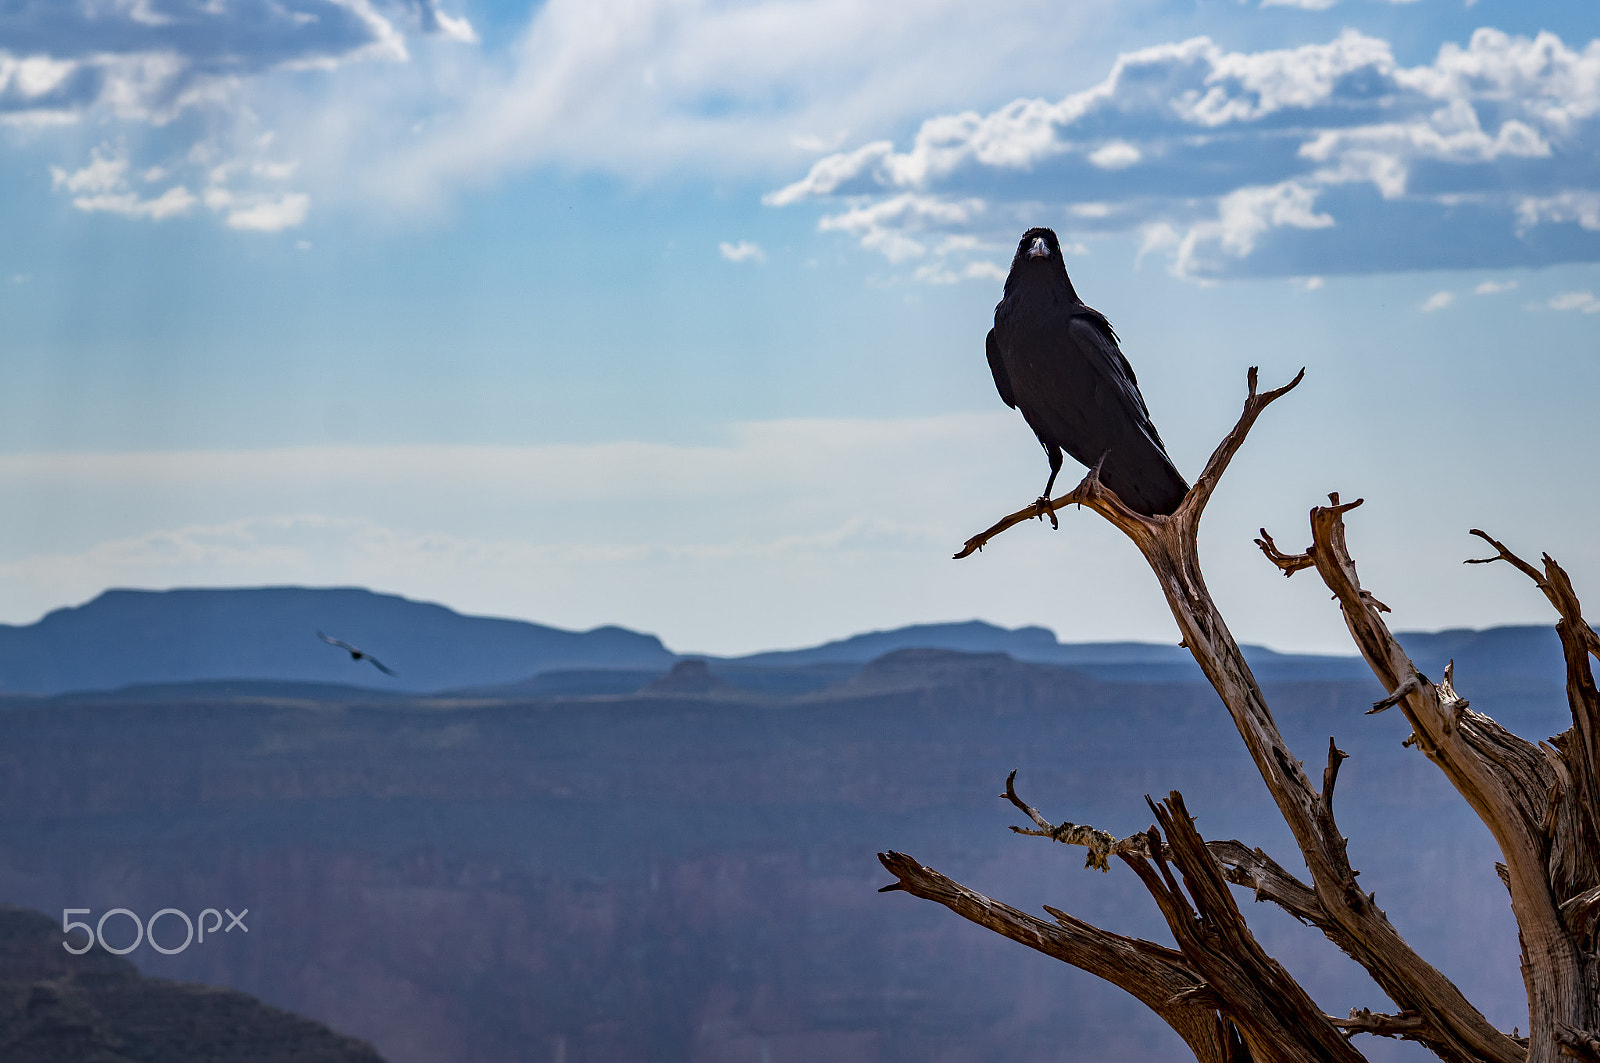 Sony SLT-A57 + Tamron SP 70-300mm F4-5.6 Di USD sample photo. Guano point grand canyon black hawk eagle photography